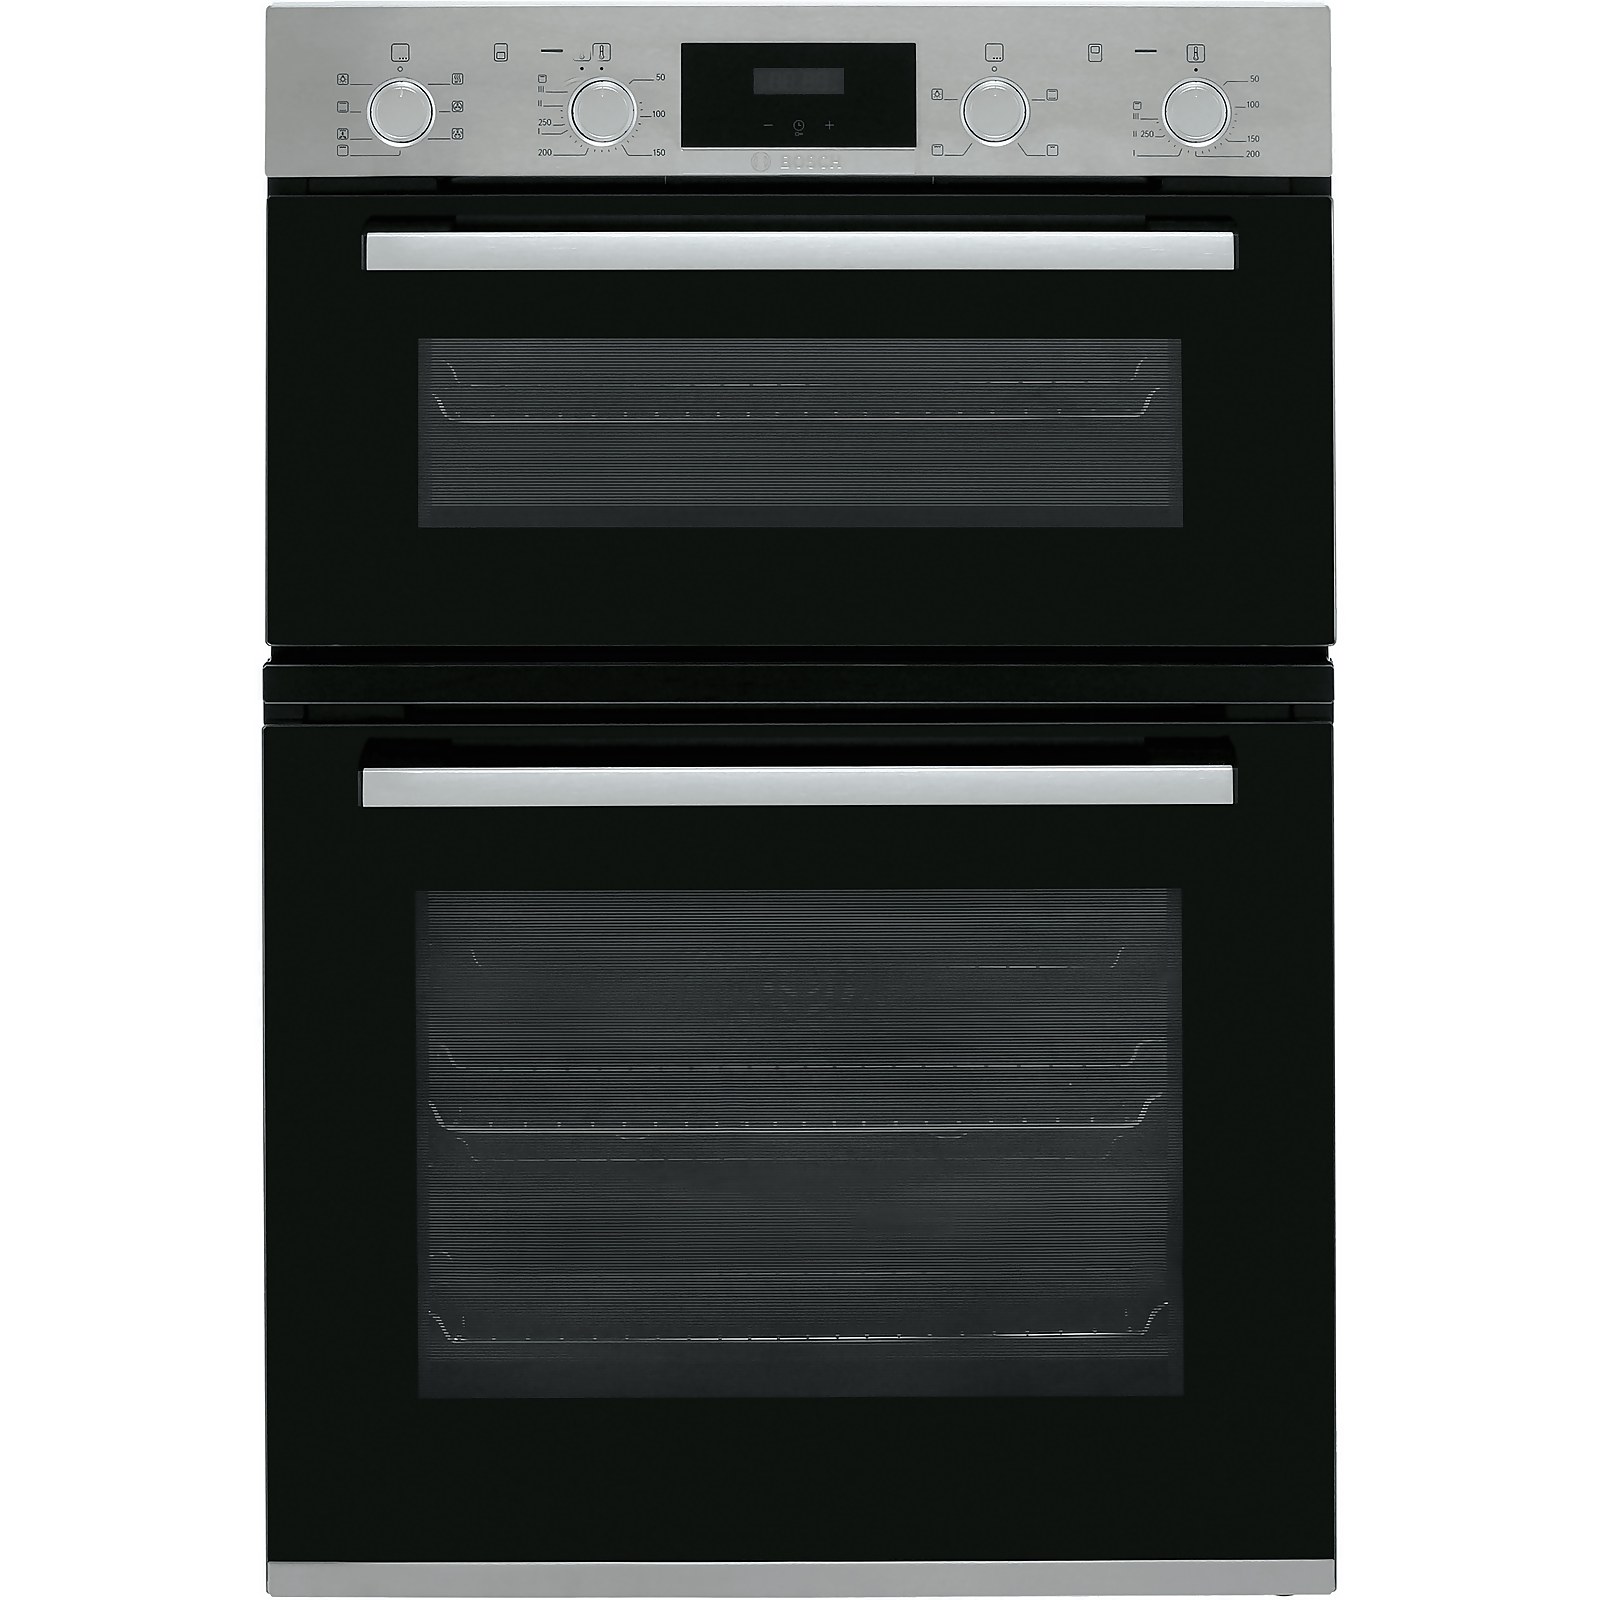 Photo of Bosch Serie 4 Mbs533bs0b Built In Electric Double Oven - Stainless Steel